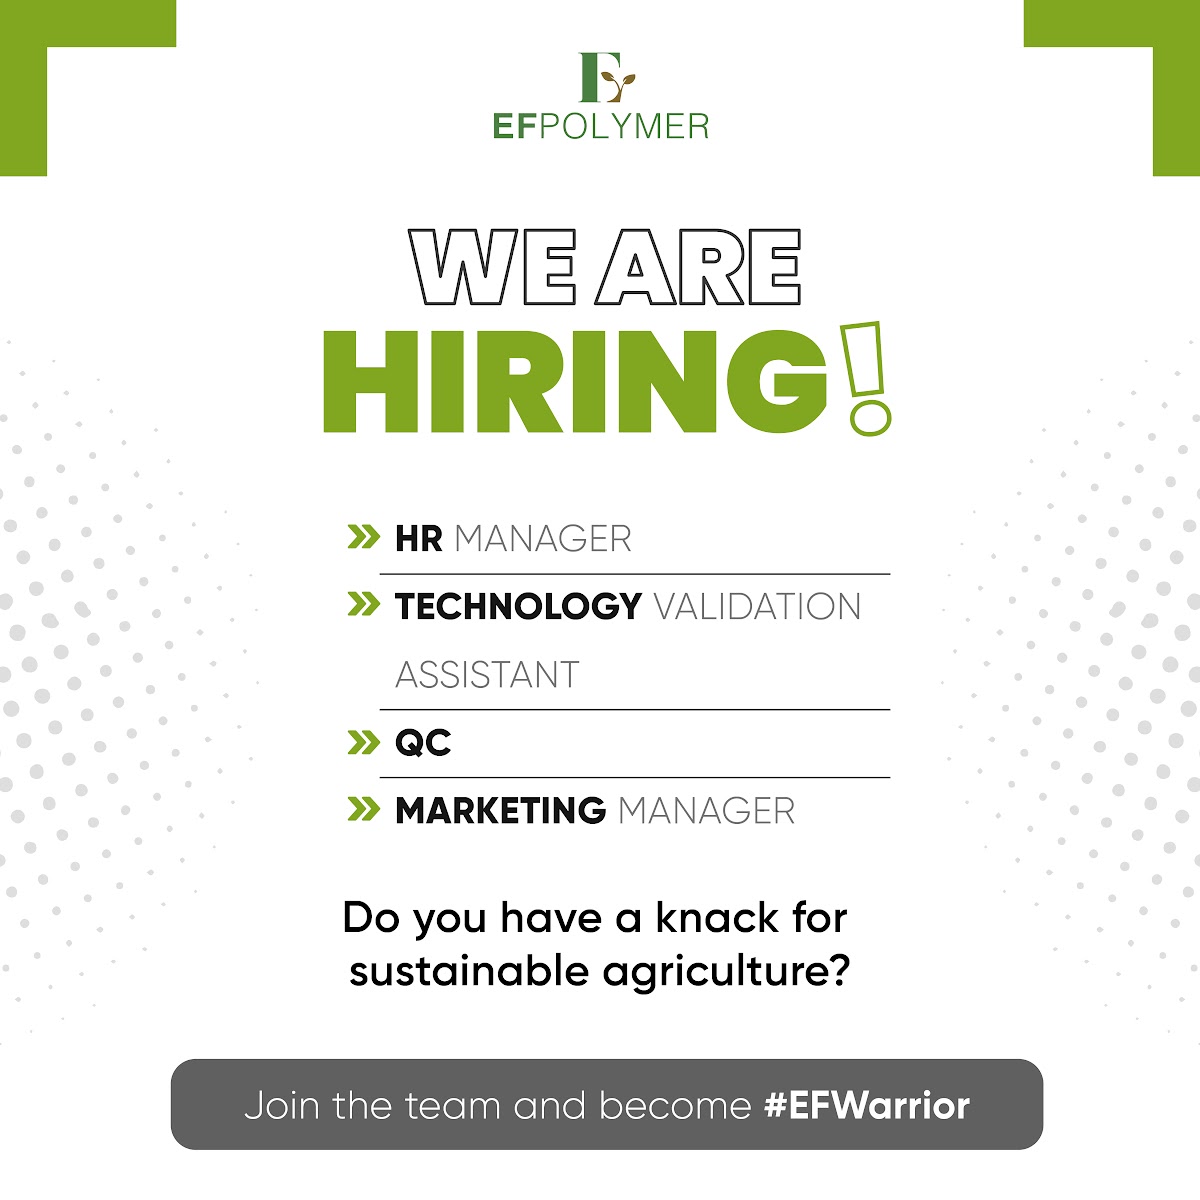 Are you passionate about organic and sustainable agriculture? Here’s your chance to create a difference with EF Polymer. 

Send us your resume at Hr@efpolymer.com today!

#hiring #hiringnow #hiringalert #hrmanager #technicalassistant #qc #marketingmanager #fasalamrit #efpolymer